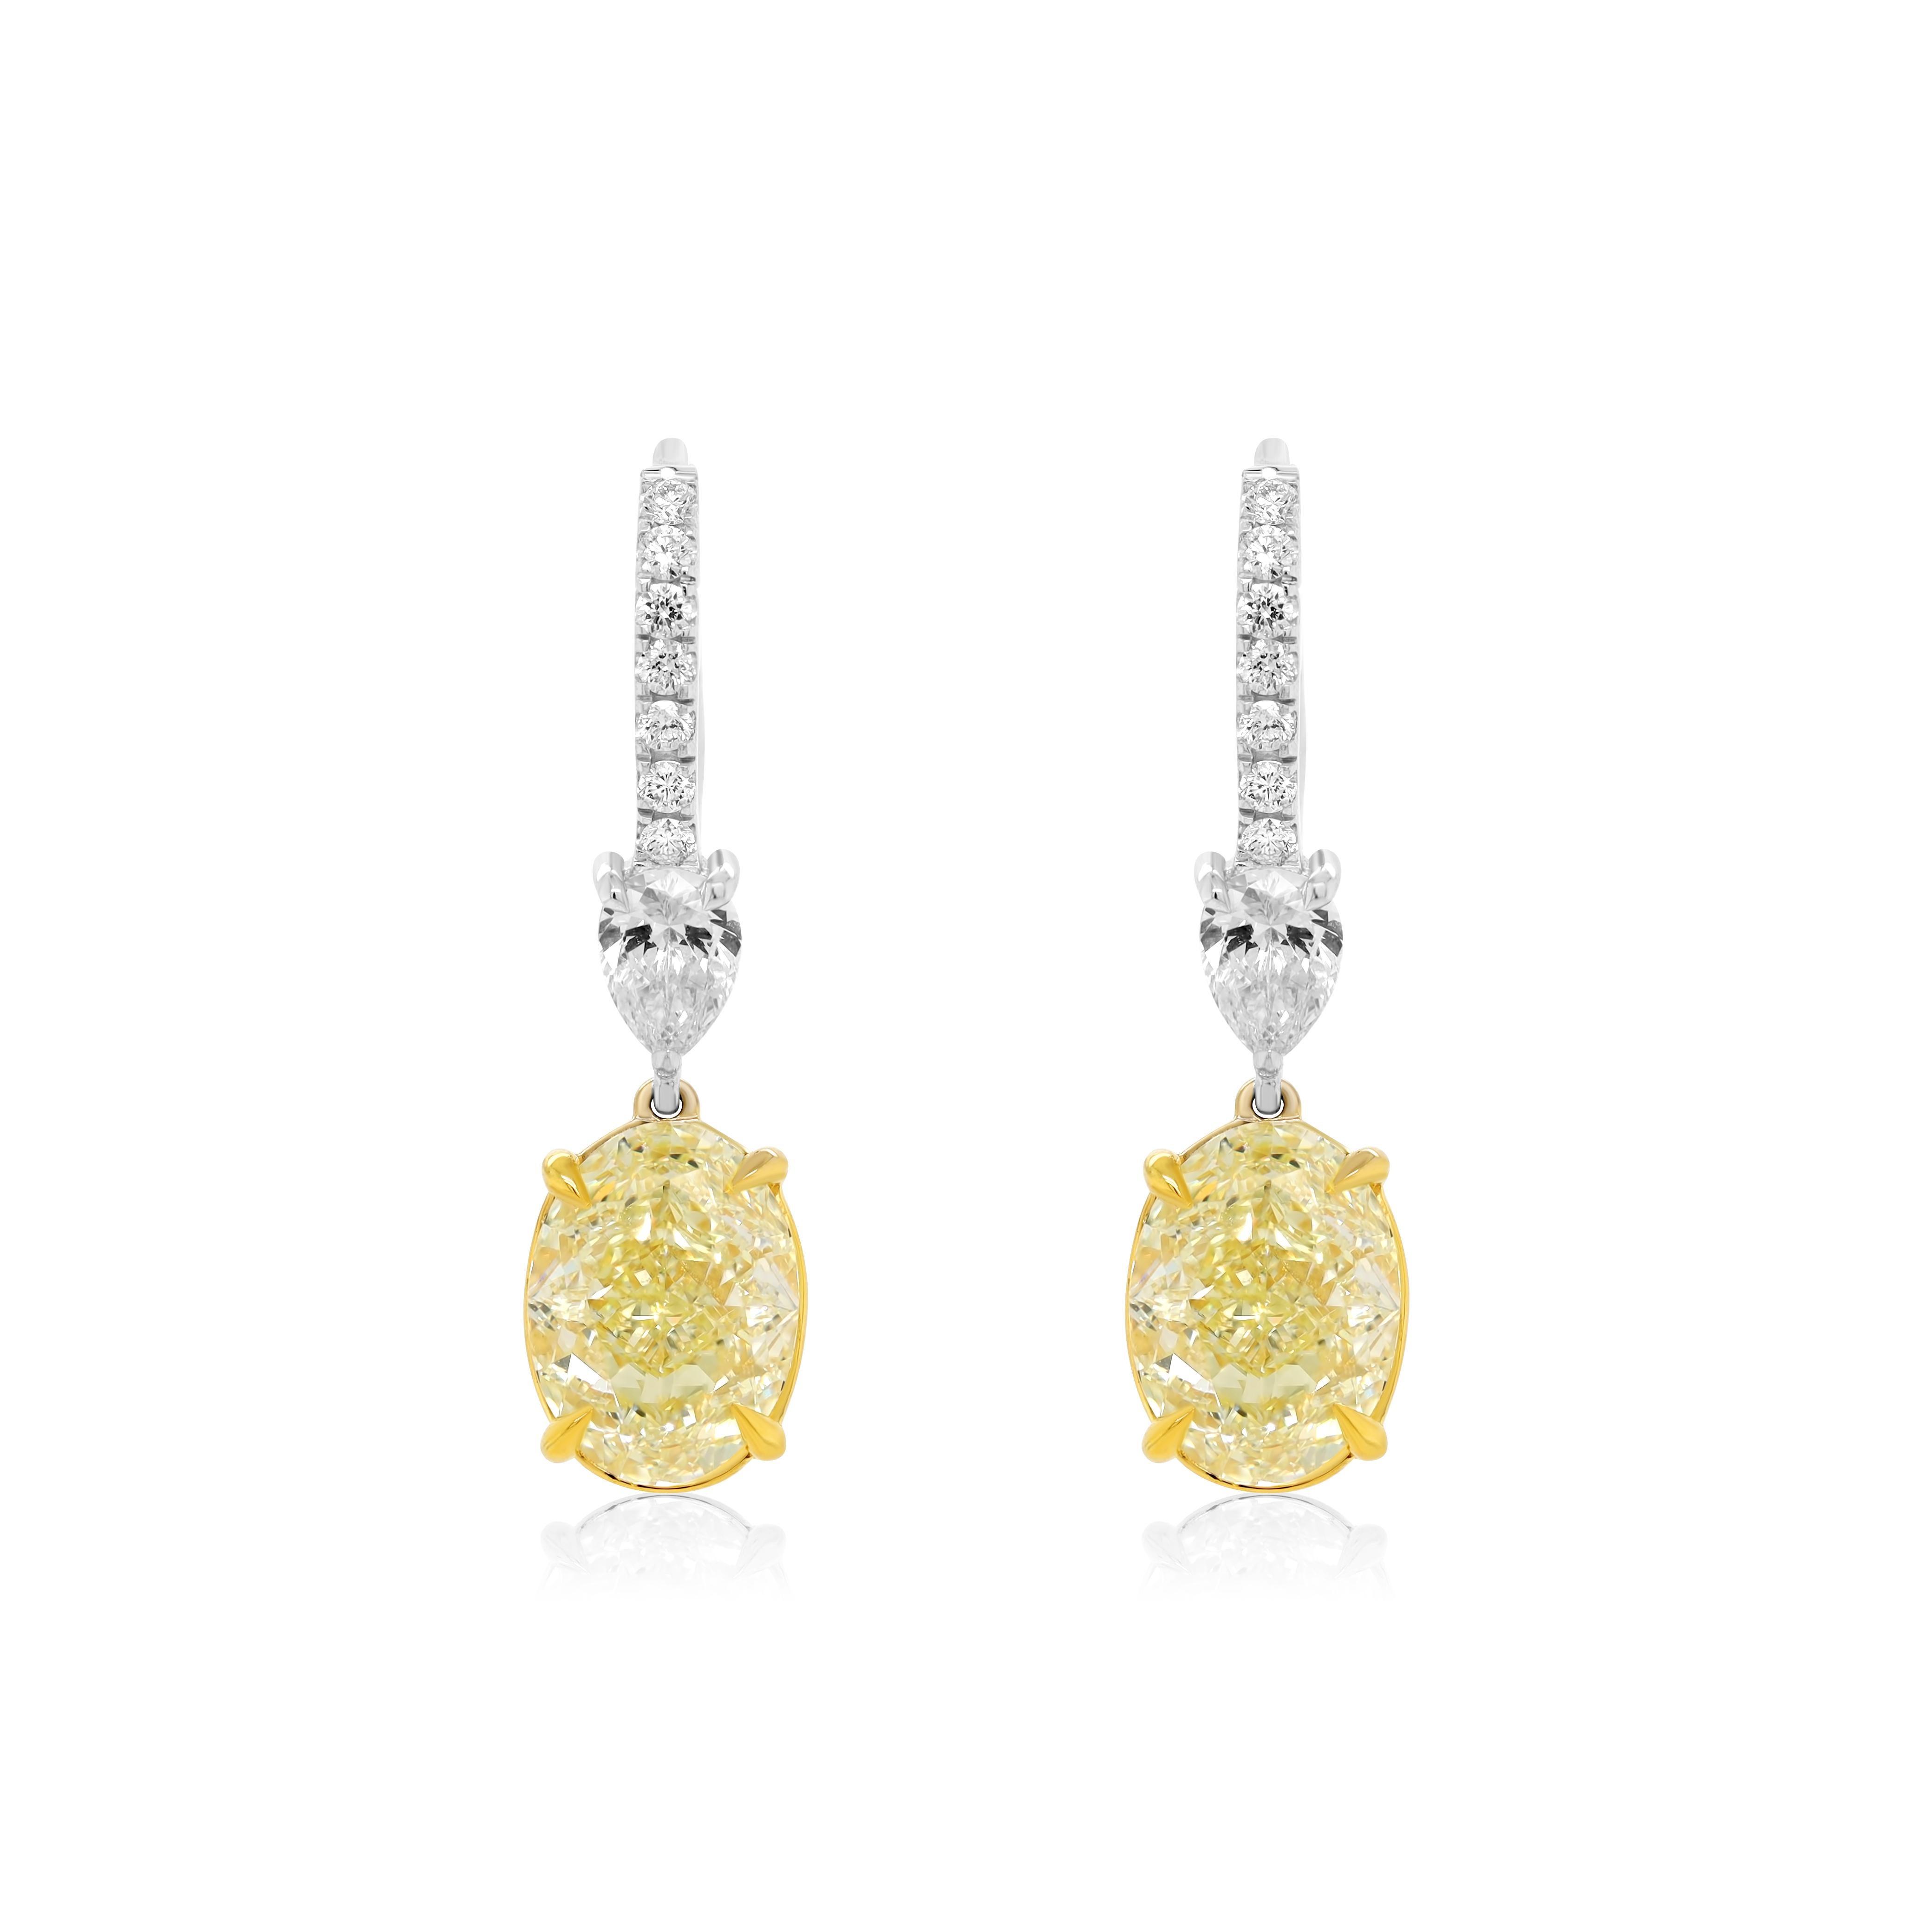 Fancy Yellow Oval Shaped Diamond Handing Earrings features 6.22 total diamonds weight, each diamond is GIA Certified. 
These beautiful diamond earrings set in Platinum and 18K Yellow Gold, each diamond is GIA Certified Oval Shaped Yellow Diamonds.